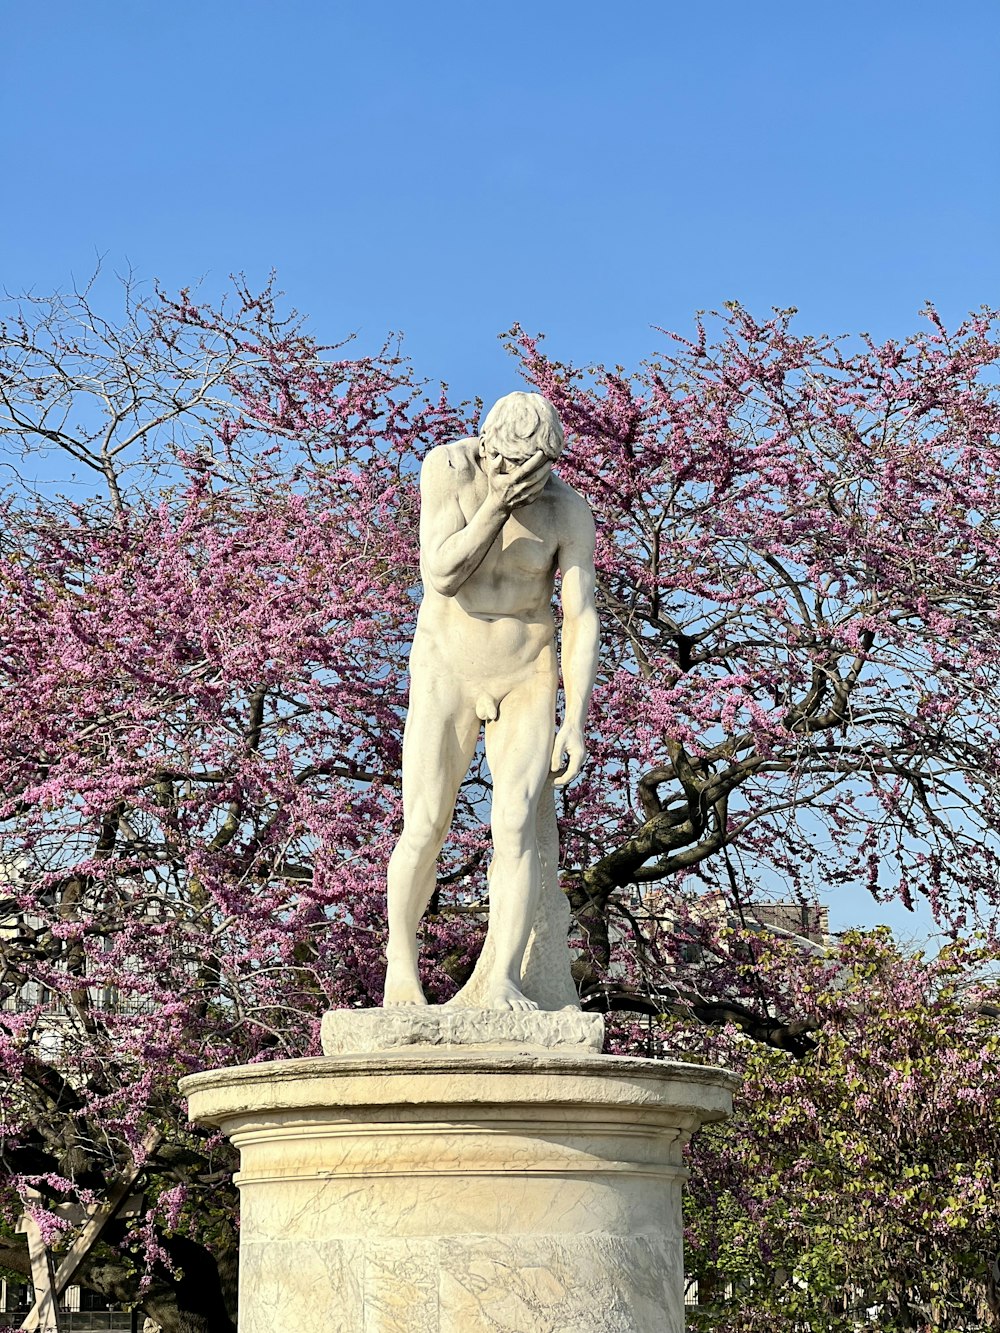 a statue of a man standing in front of a tree